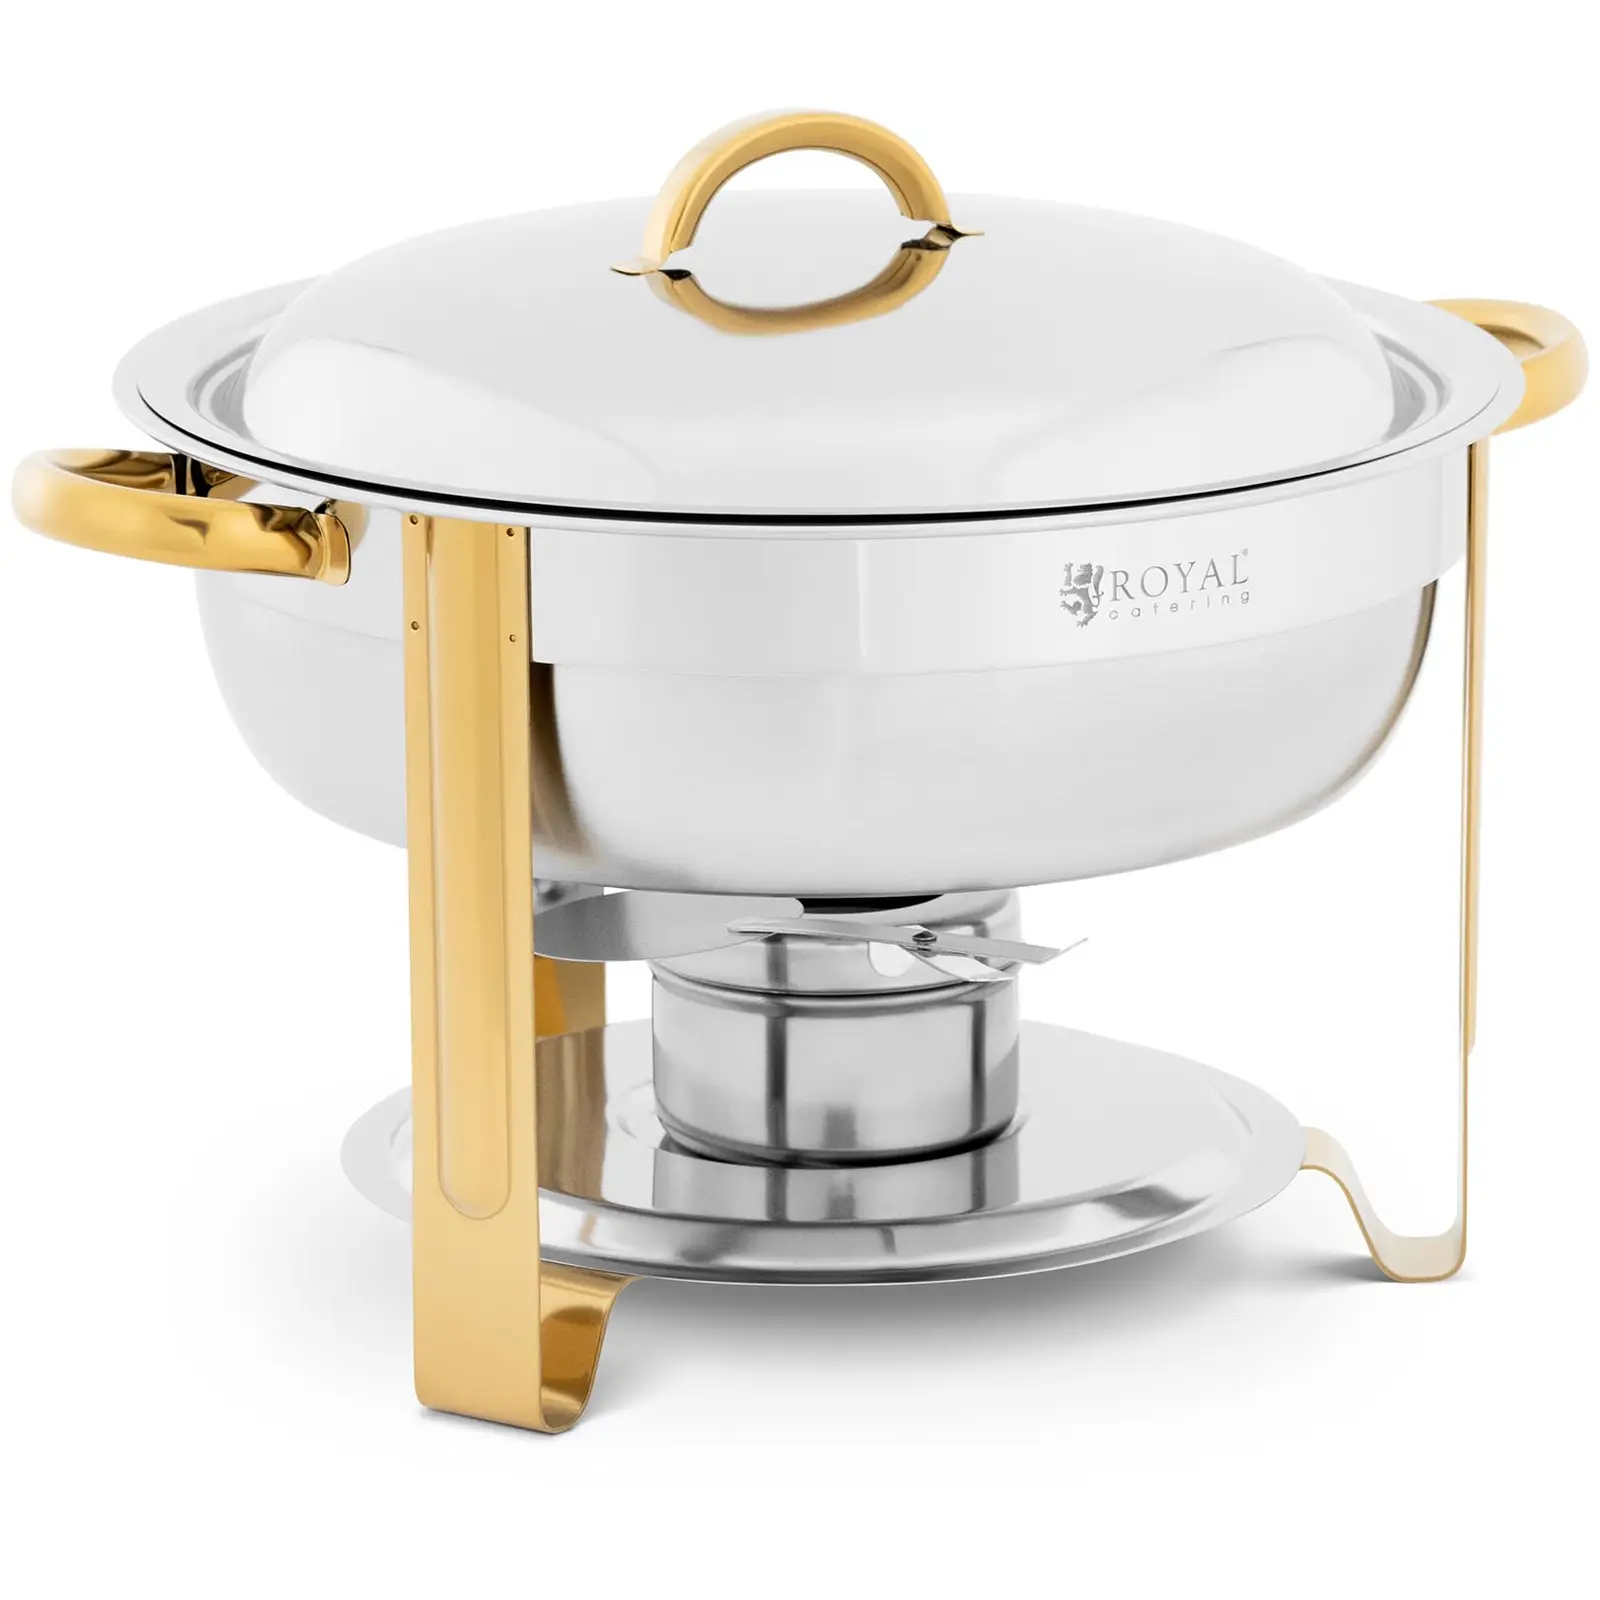 Chafing Dish - round - gold accents - 4.5 L - 1 Fuel cell - Folding feet - Royal Catering